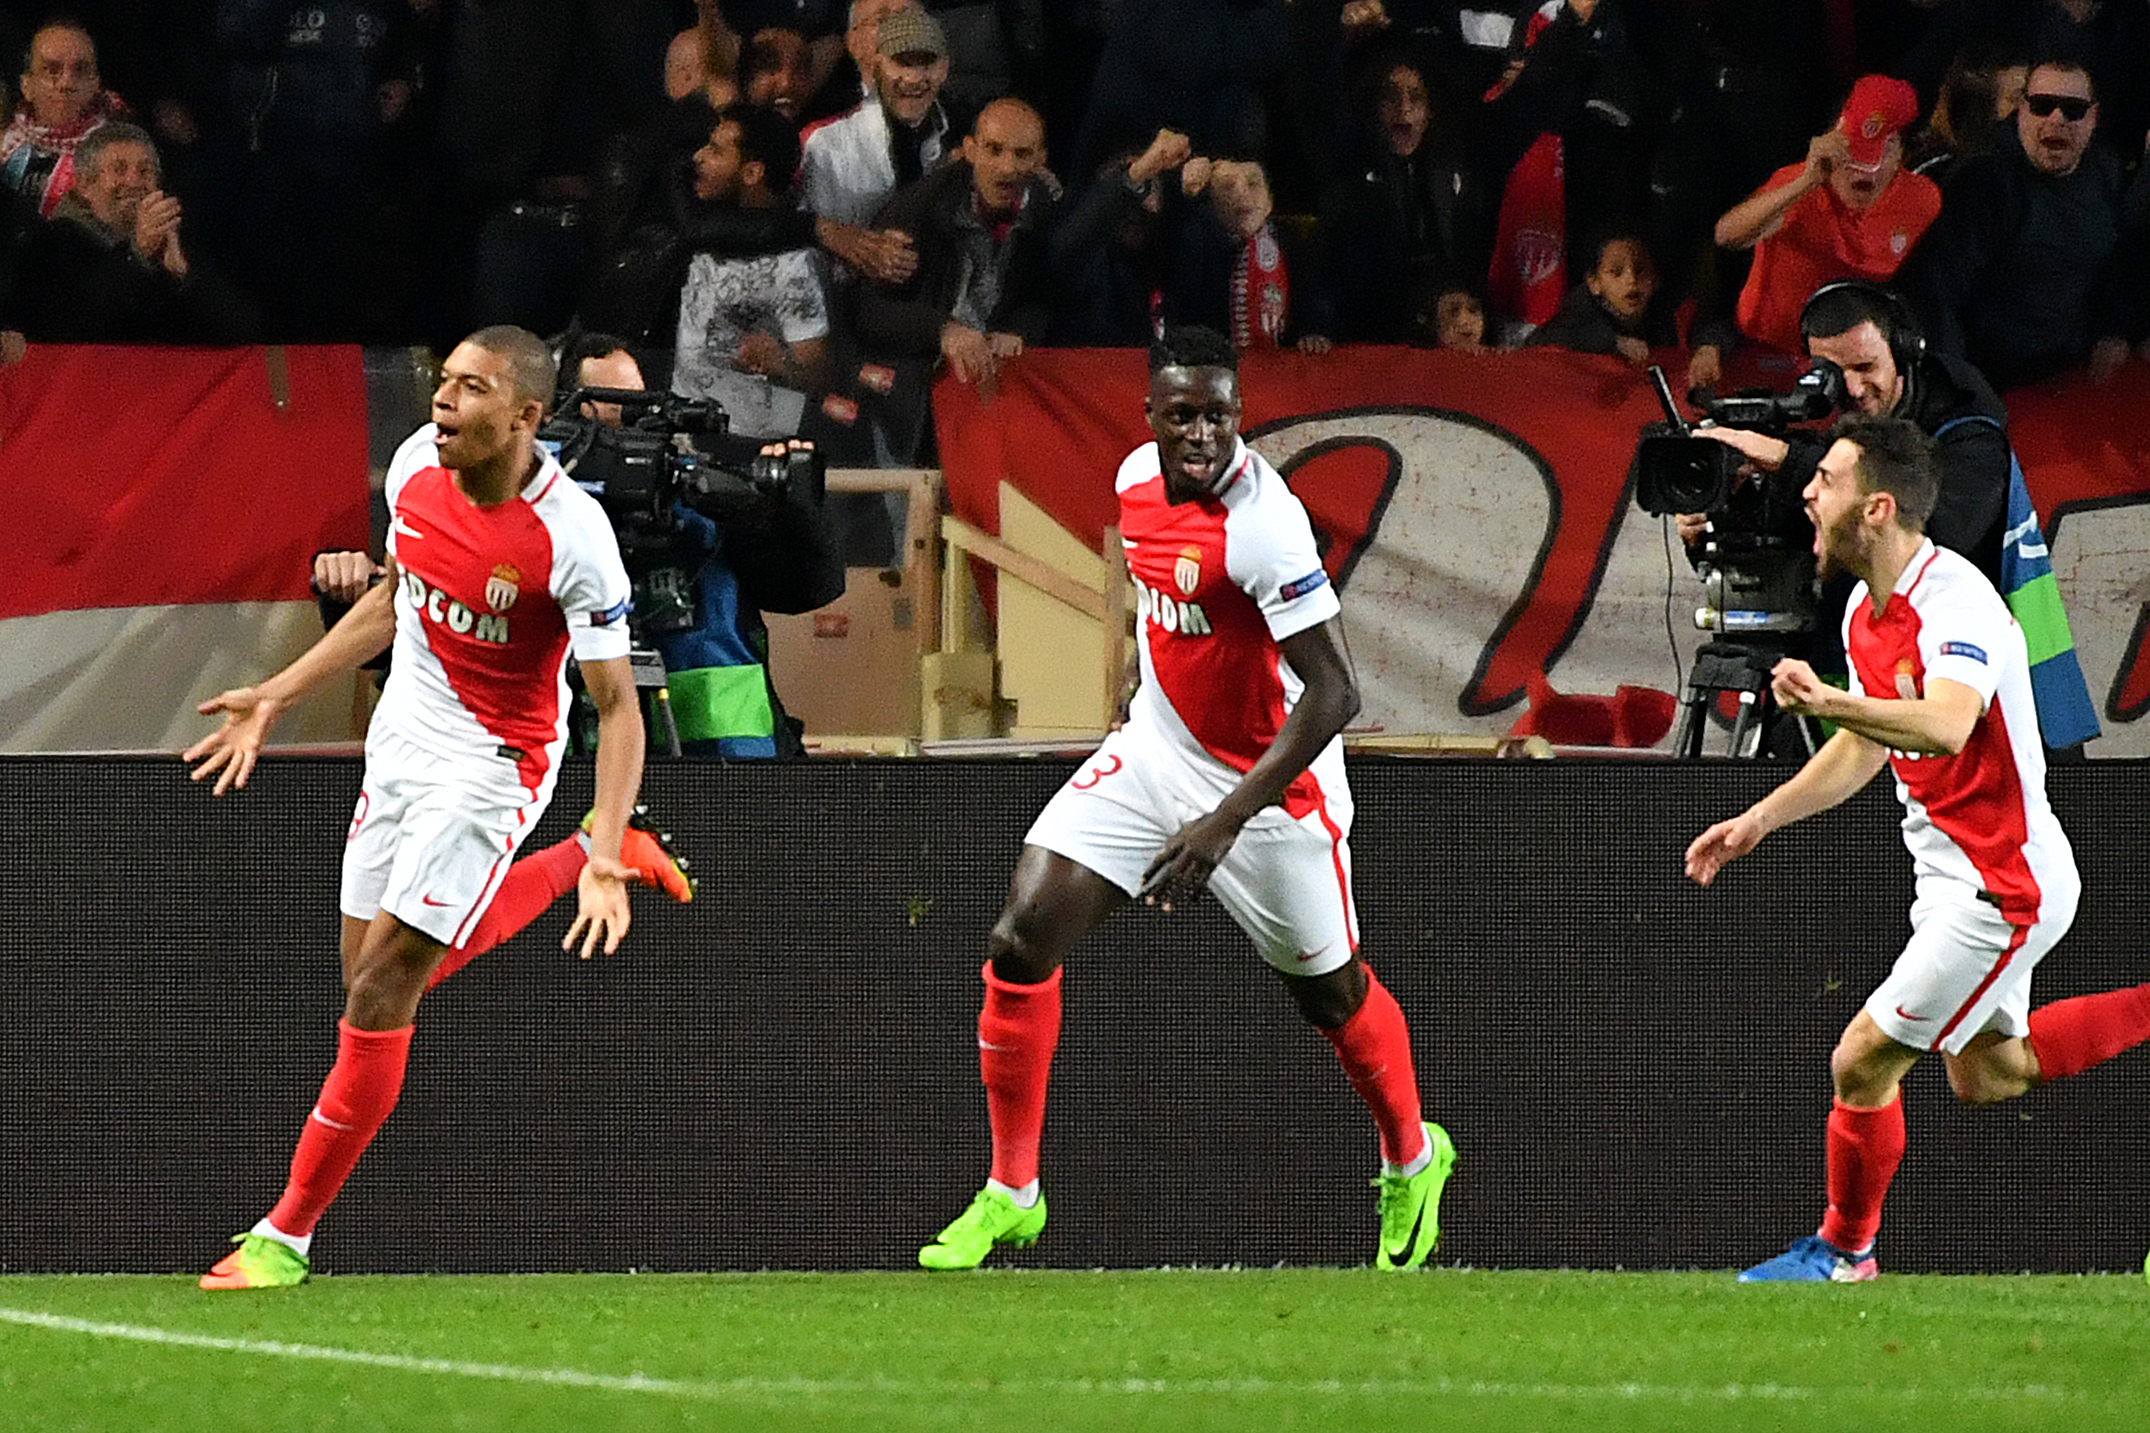 Monaco's French forward Kylian Mbappe Lottin (L) celebrates with teammates after scoring a goal during the UEFA Champions League round of 16 football match between Monaco and Manchester City at the Stade Louis II in Monaco on March 15, 2017. / AFP PHOTO / Pascal GUYOT        (Photo credit should read PASCAL GUYOT/AFP/Getty Images)